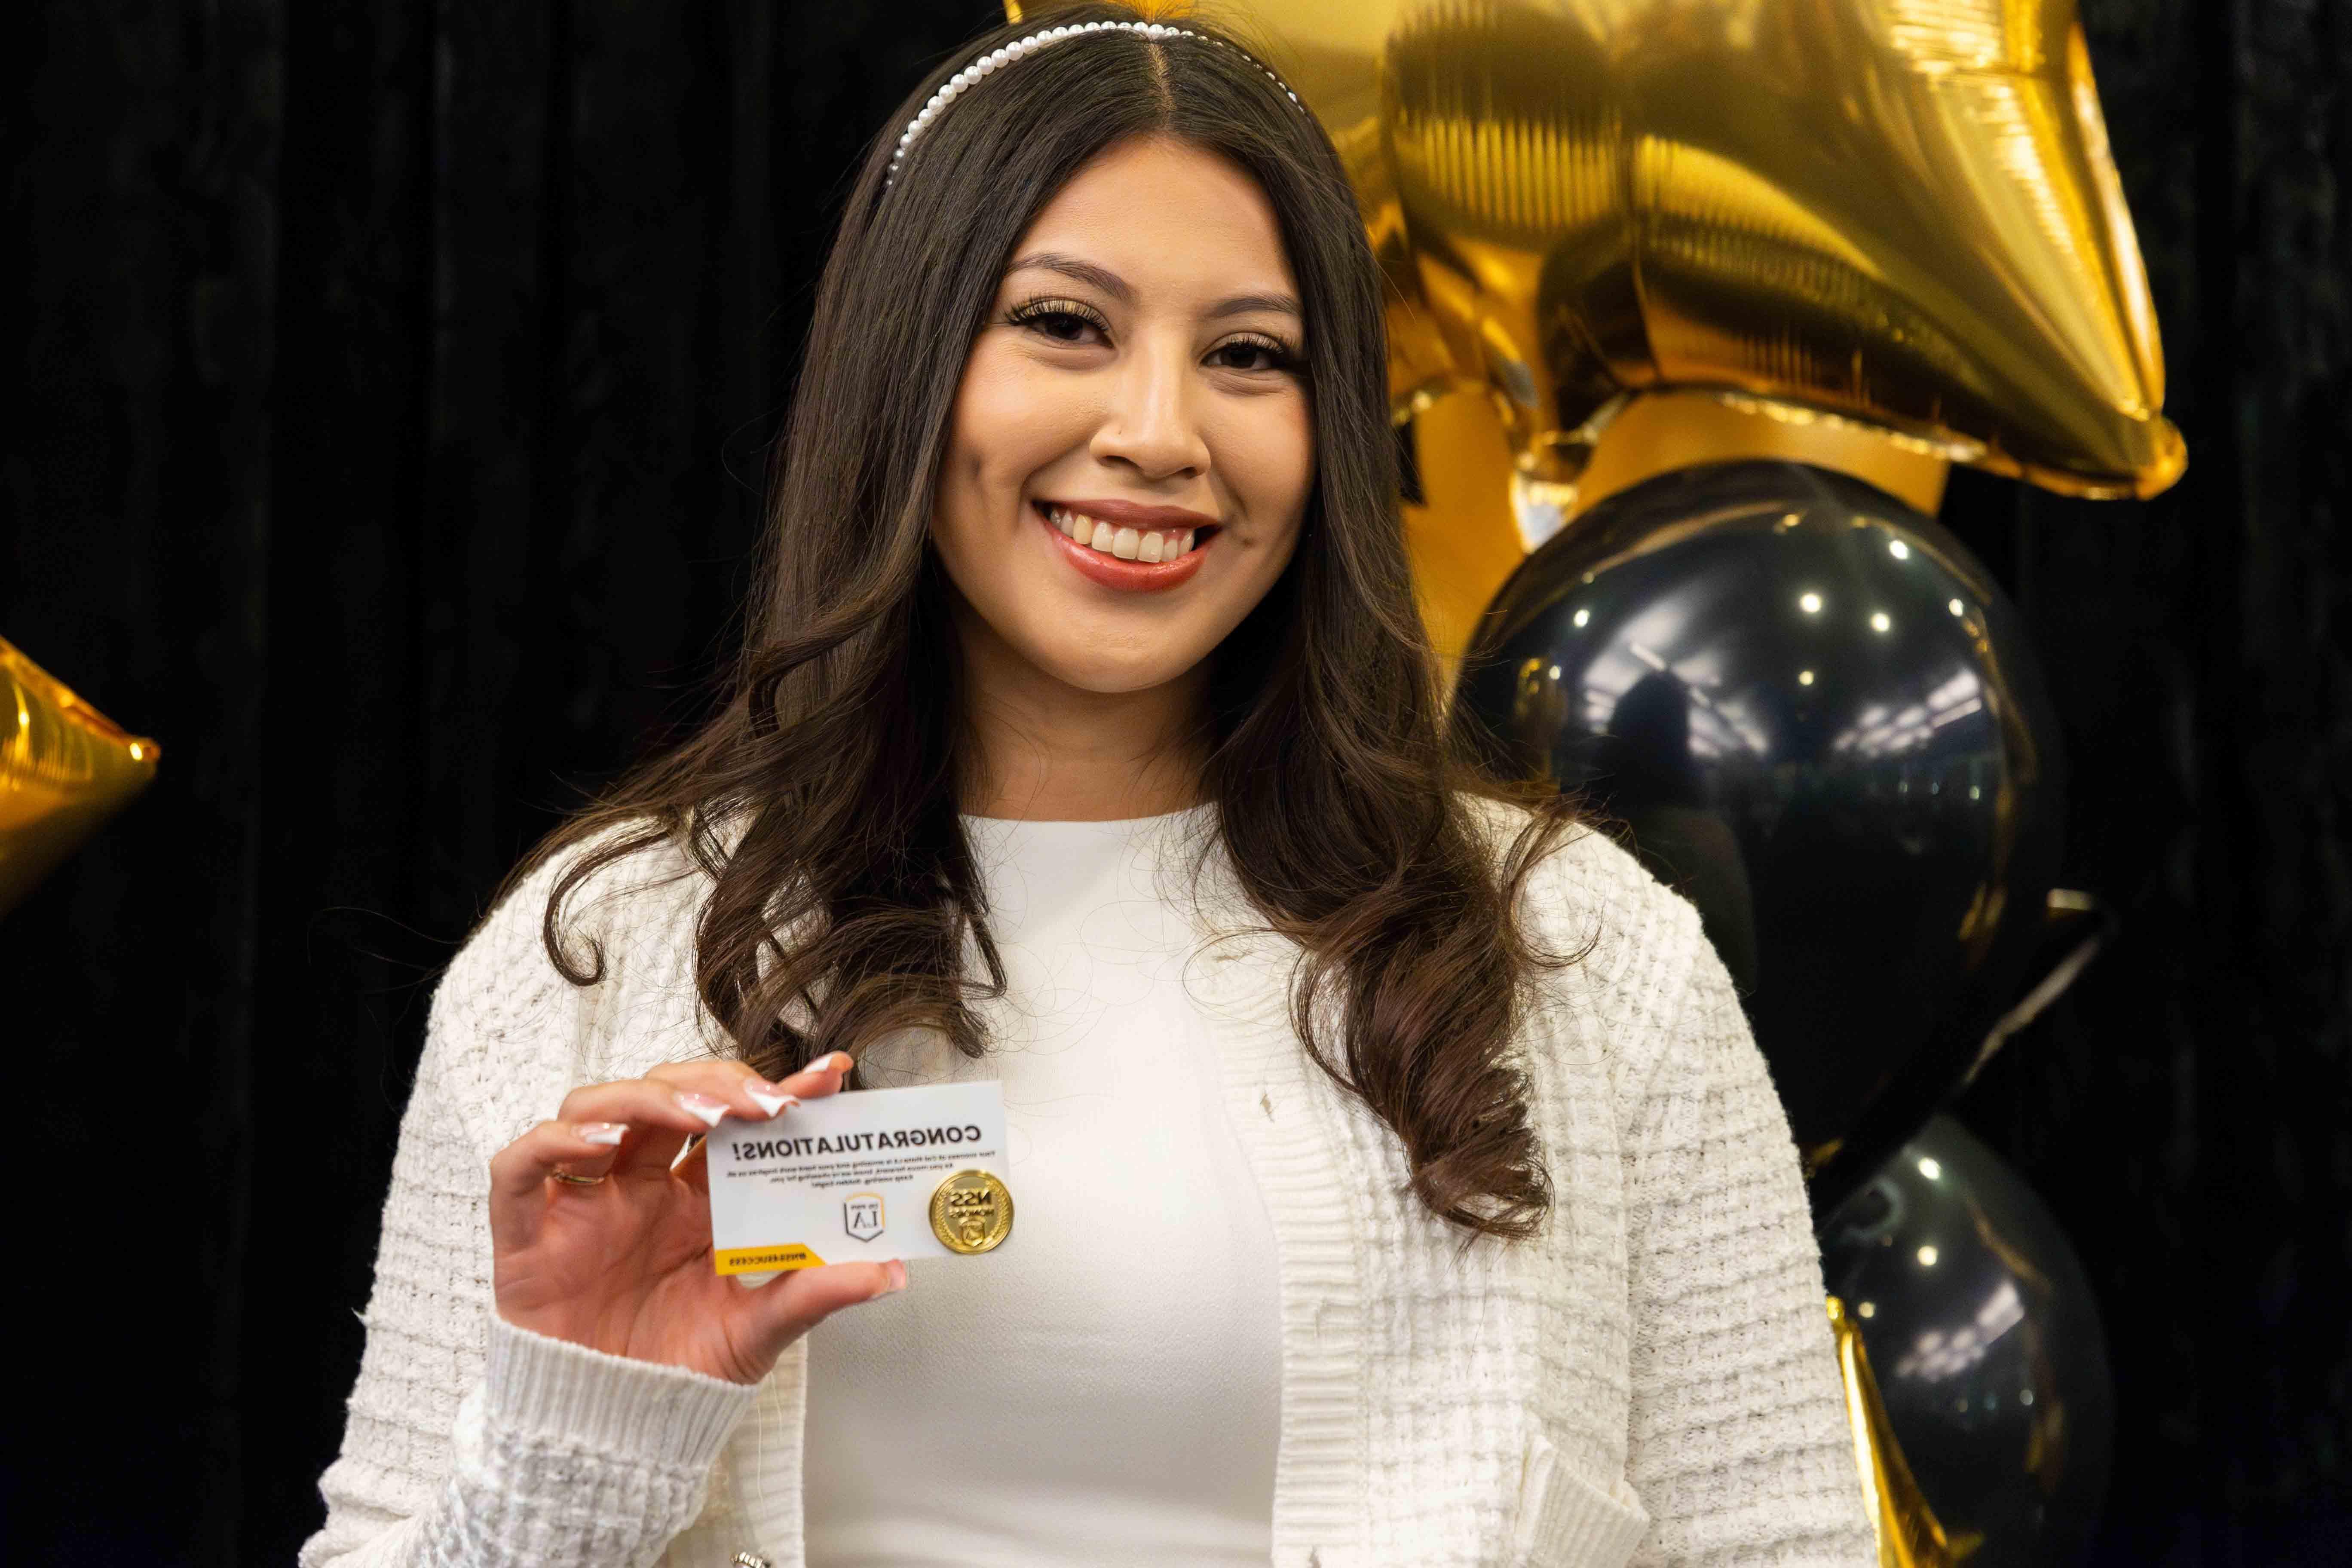 Cal State LA student holding up NSS Honors Pin